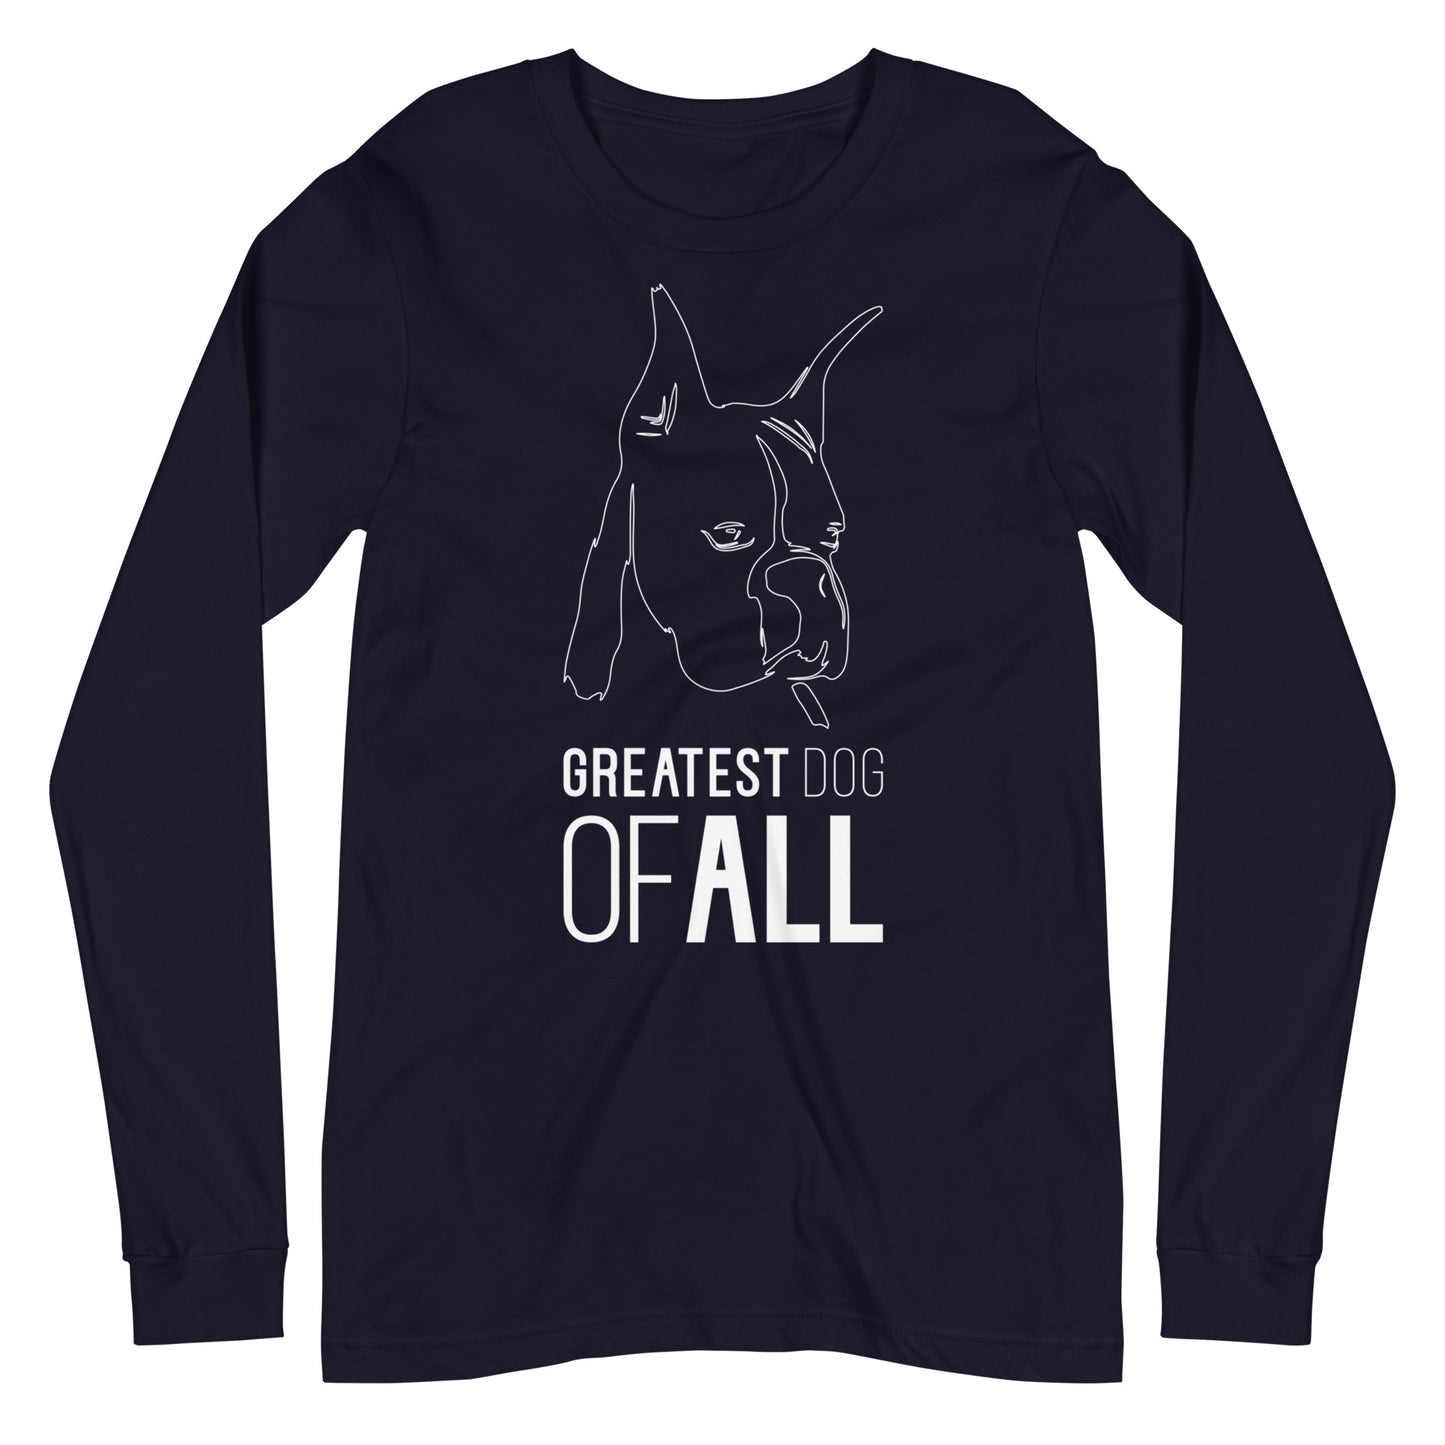 White line Boxer face with Greatest Dog of All caption on unisex navy long sleeve t-shirt